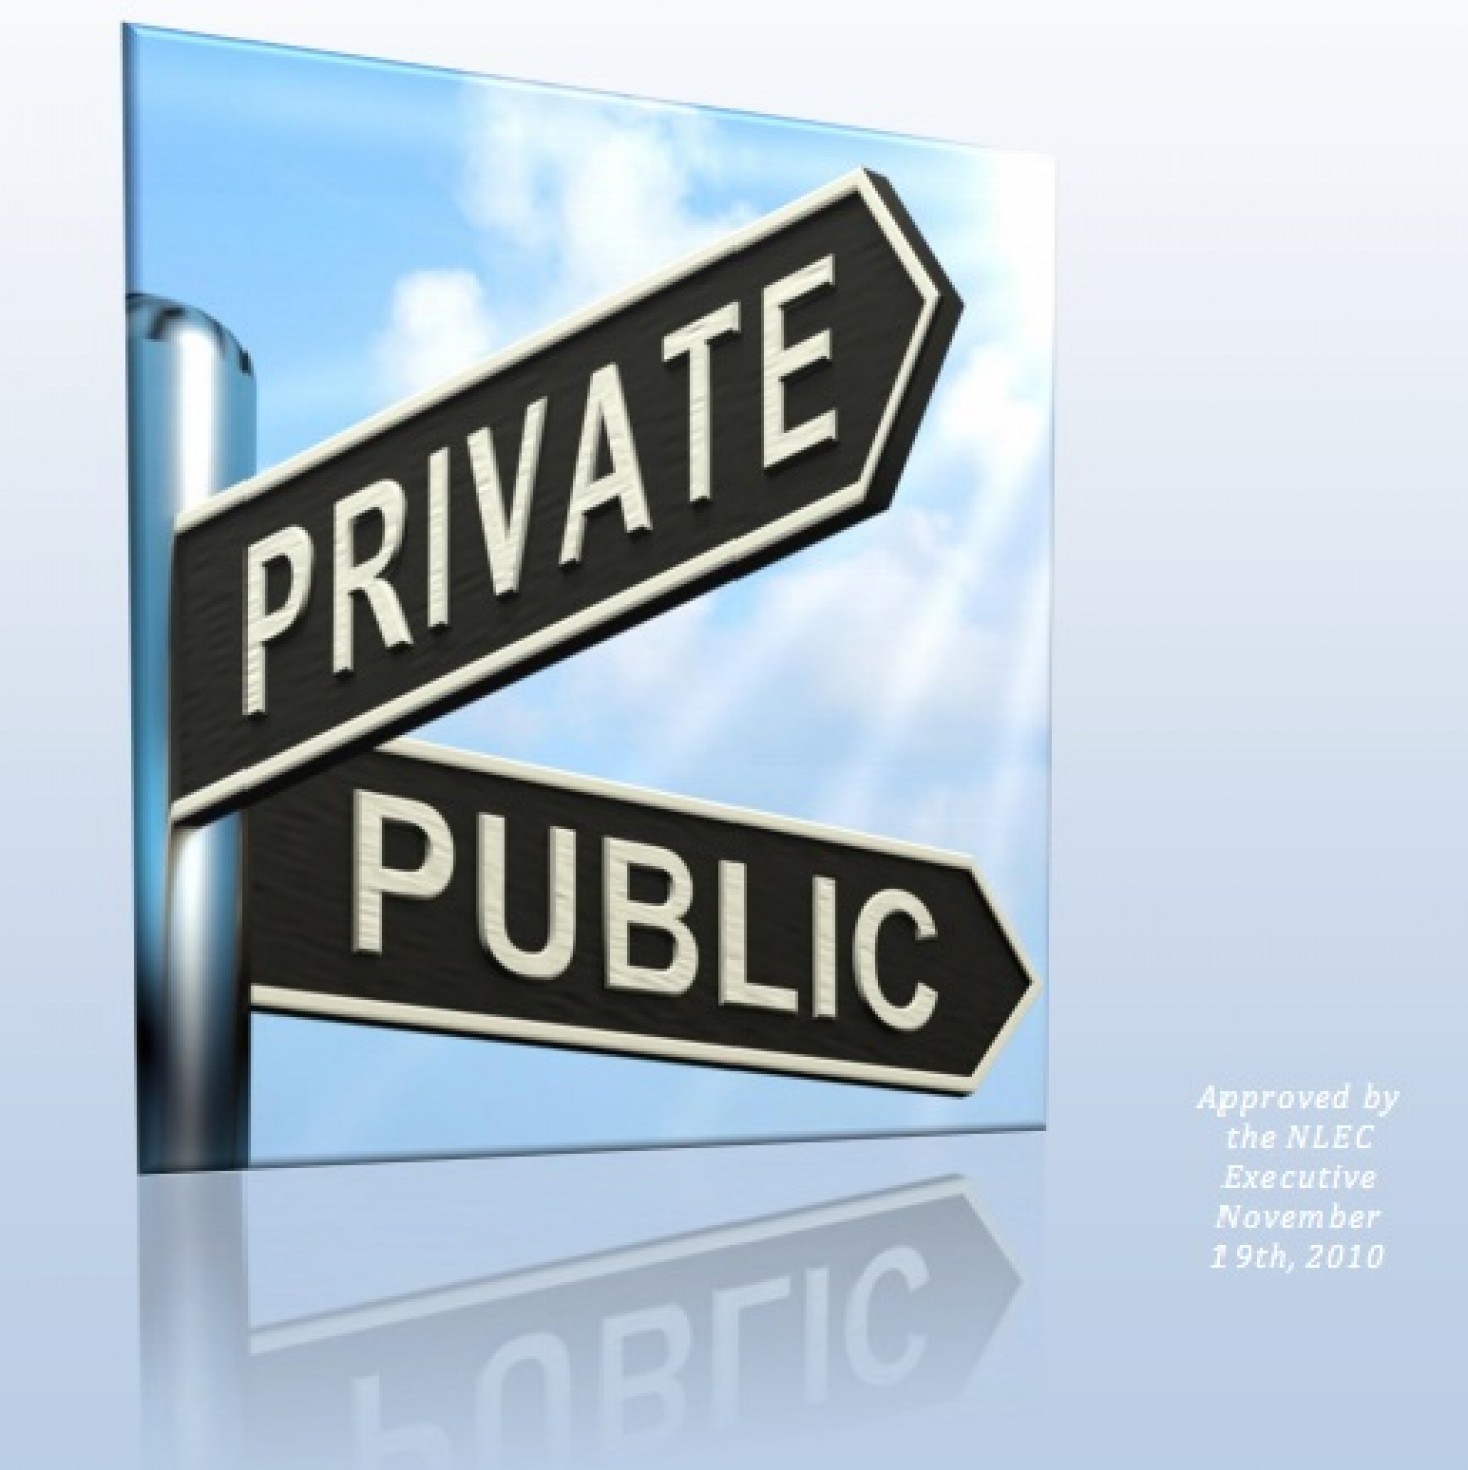 Reduce the Expanding Inequity Between Federal Public and Private Sector Pensions